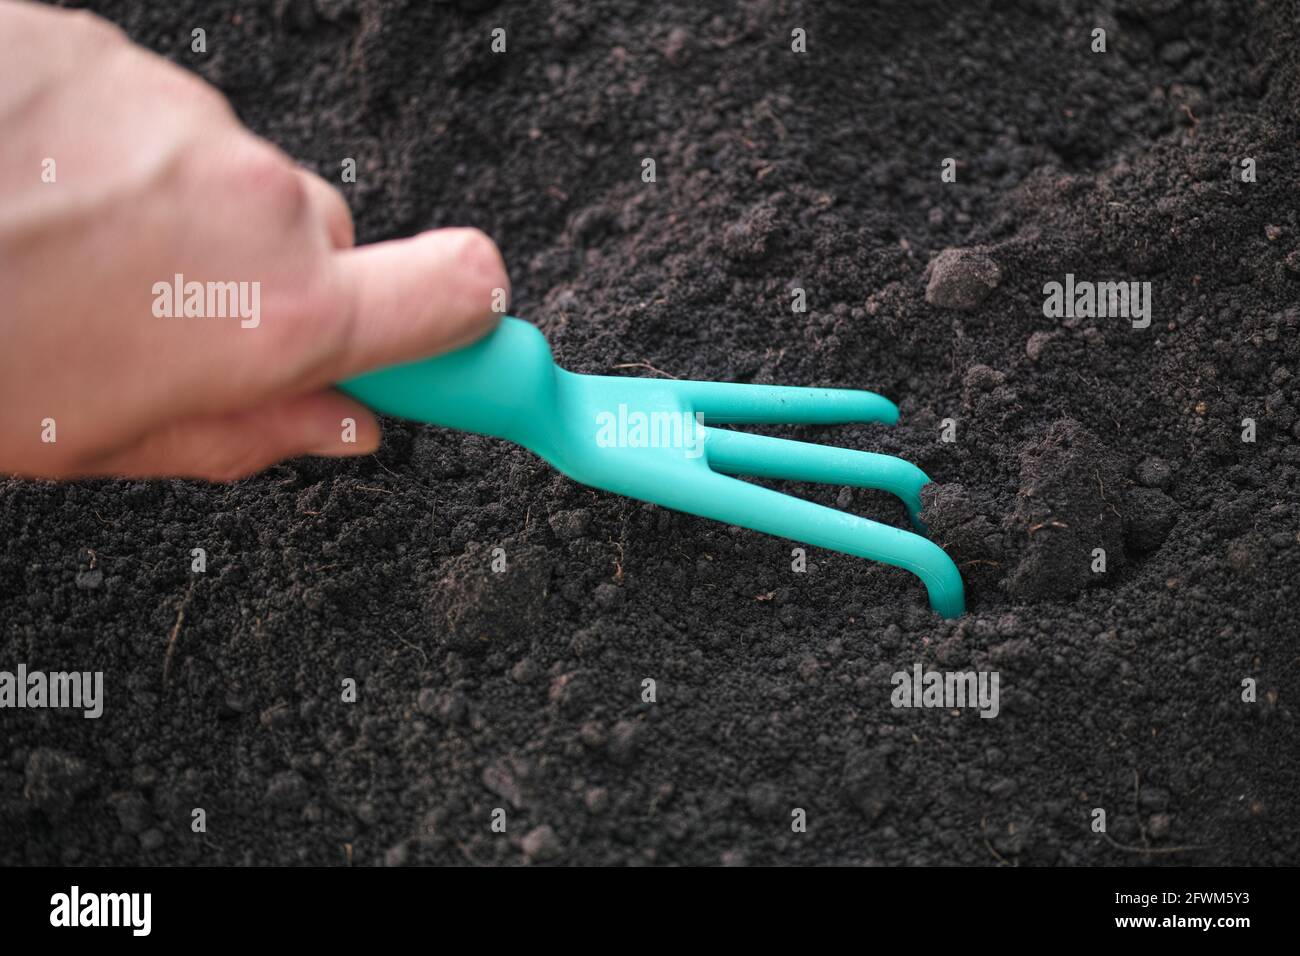 A person preparing soil using a handled claw cultivator. Close up. Stock Photo